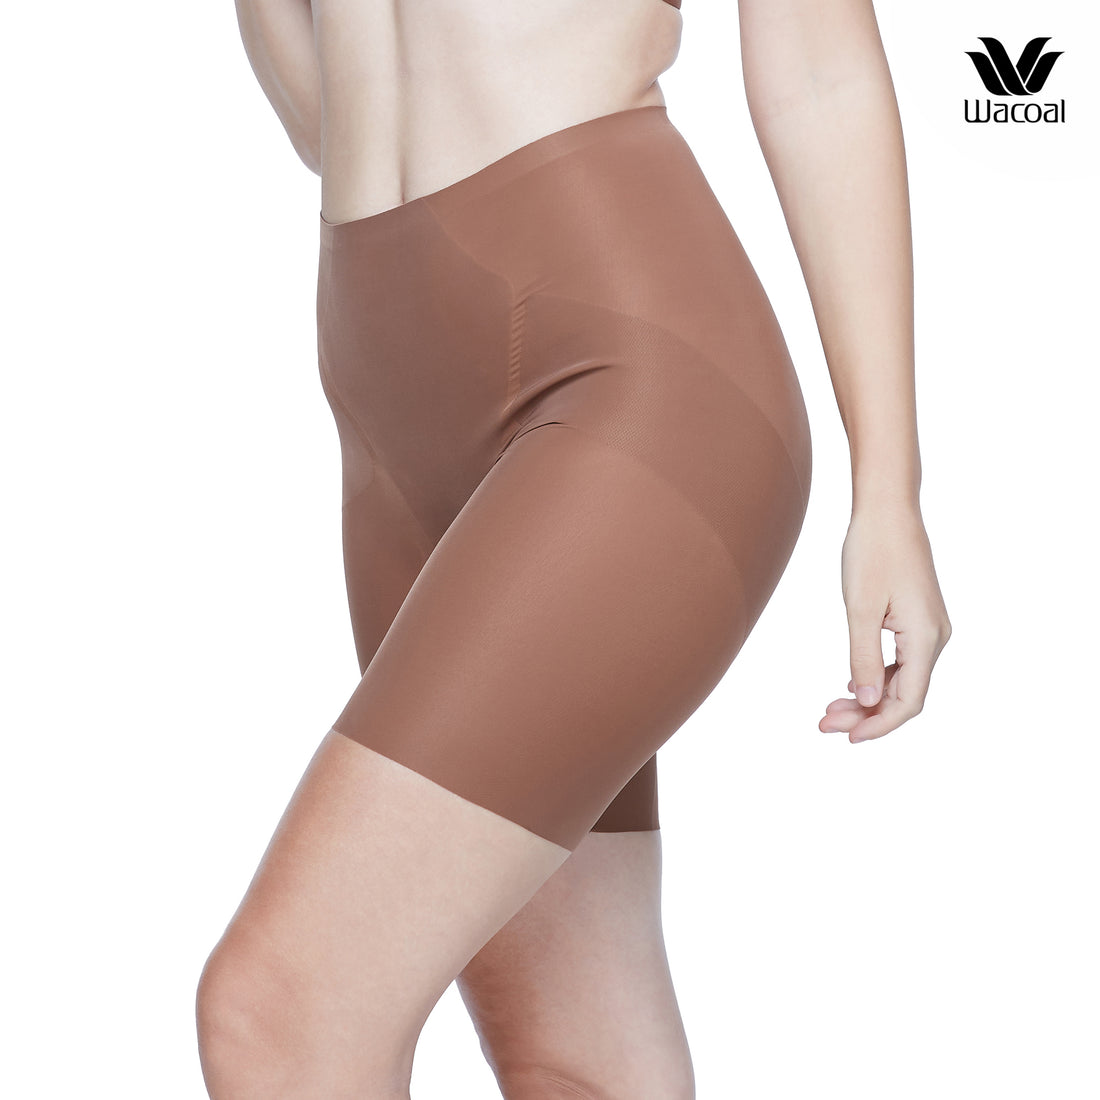 Wacoal Shape Beautifier Hips long-sleeved compression pants, model WY1617, brown (BR)